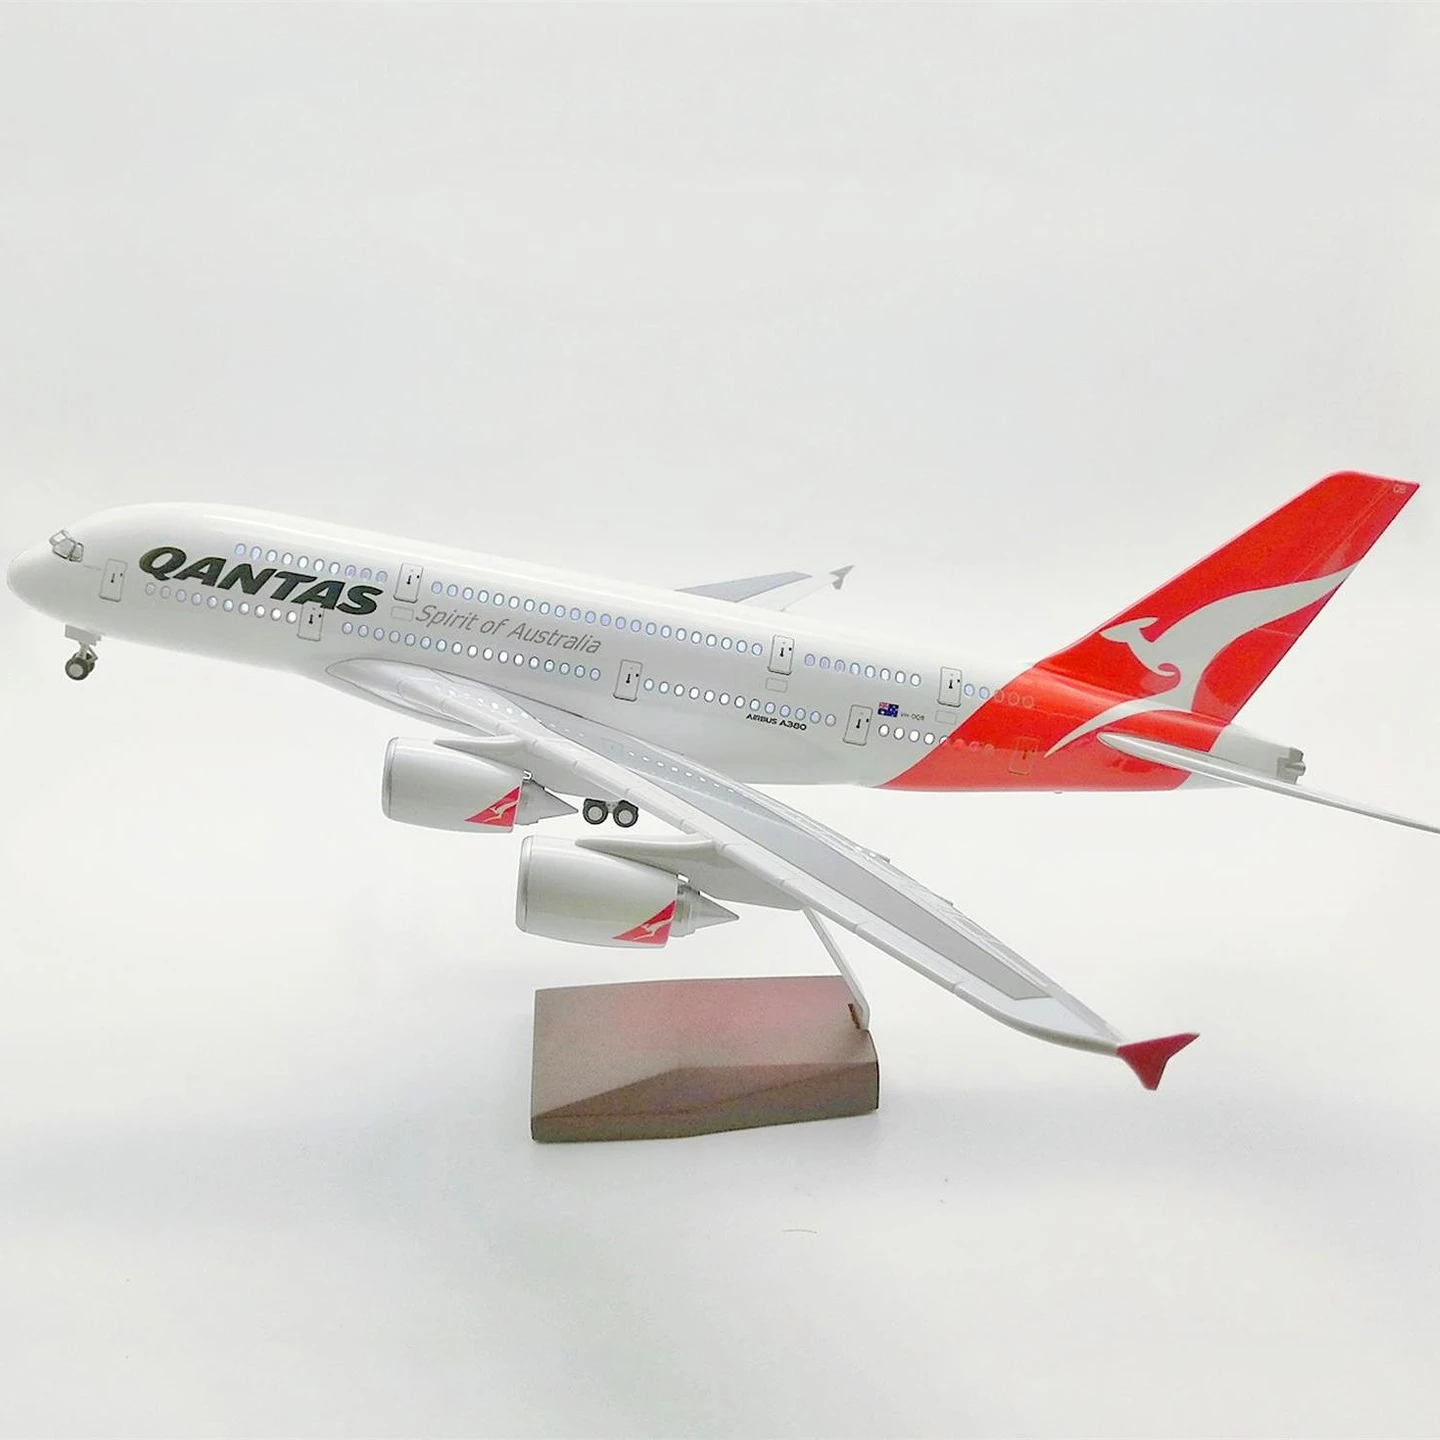 

Airbus Qantas A380 LED Aircraft Model Resin 46cm Landing Gear With Lighted Decorations Civil Aviation Custom Painting